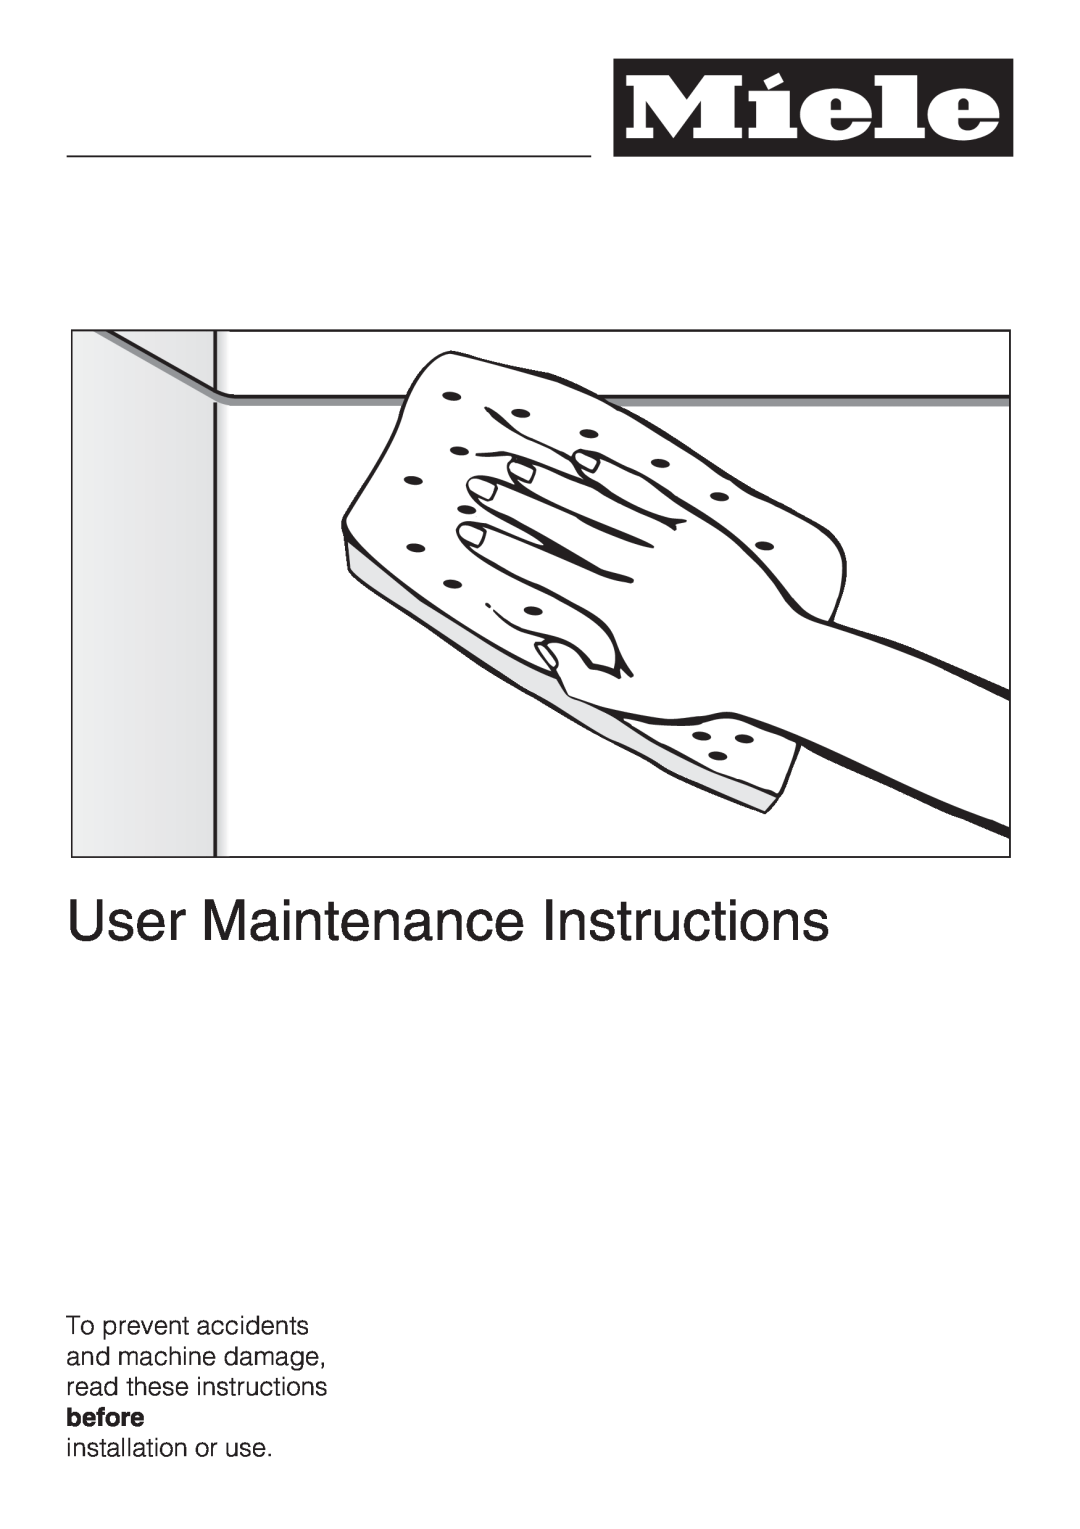 Miele G 5220, G 5225 operating instructions User Maintenance Instructions, installation or use 